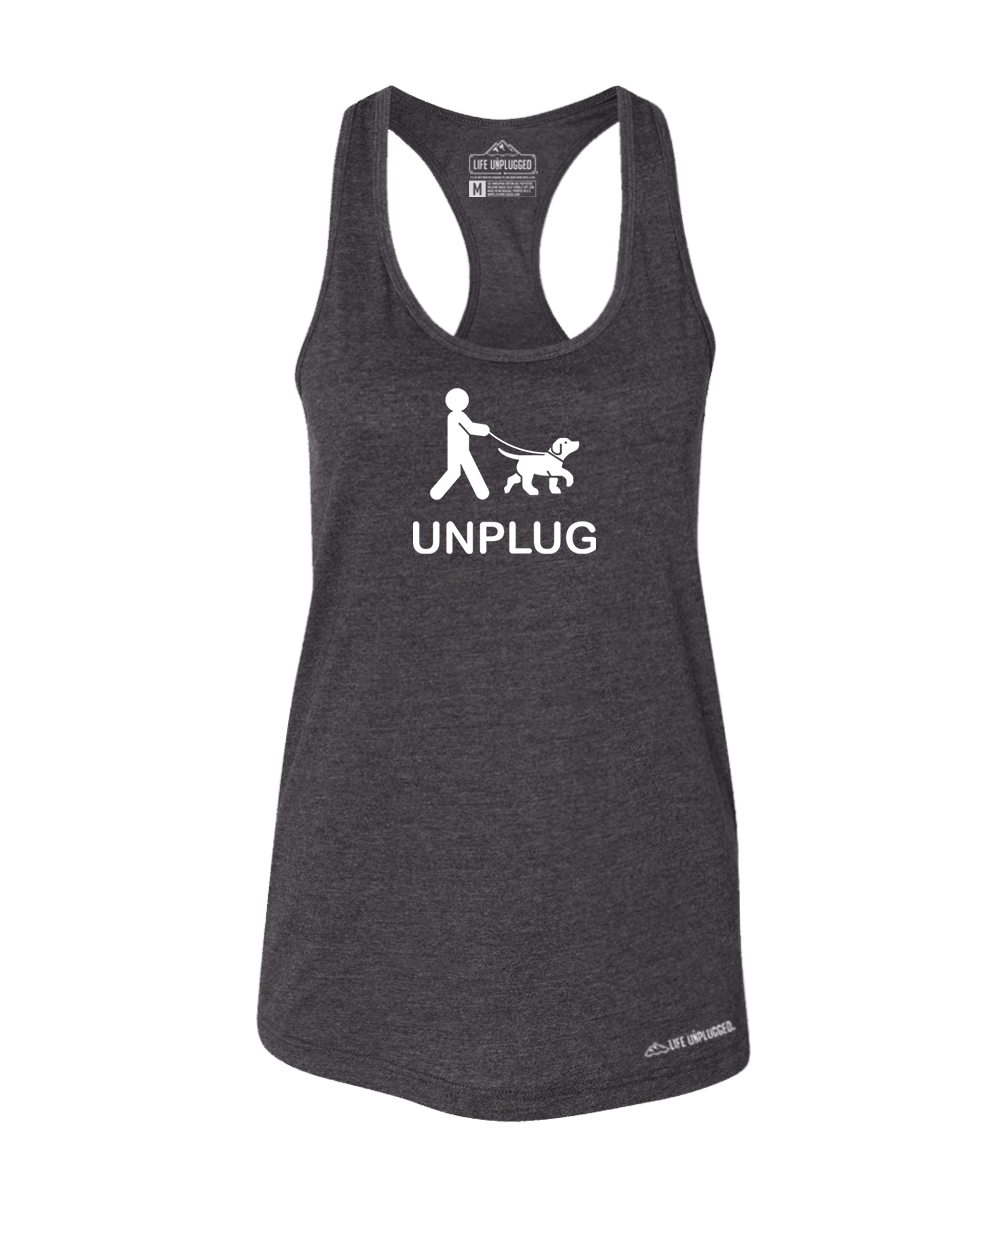 Dog Walking Premium Women's Relaxed Fit Racerback Tank Top - Life Unplugged